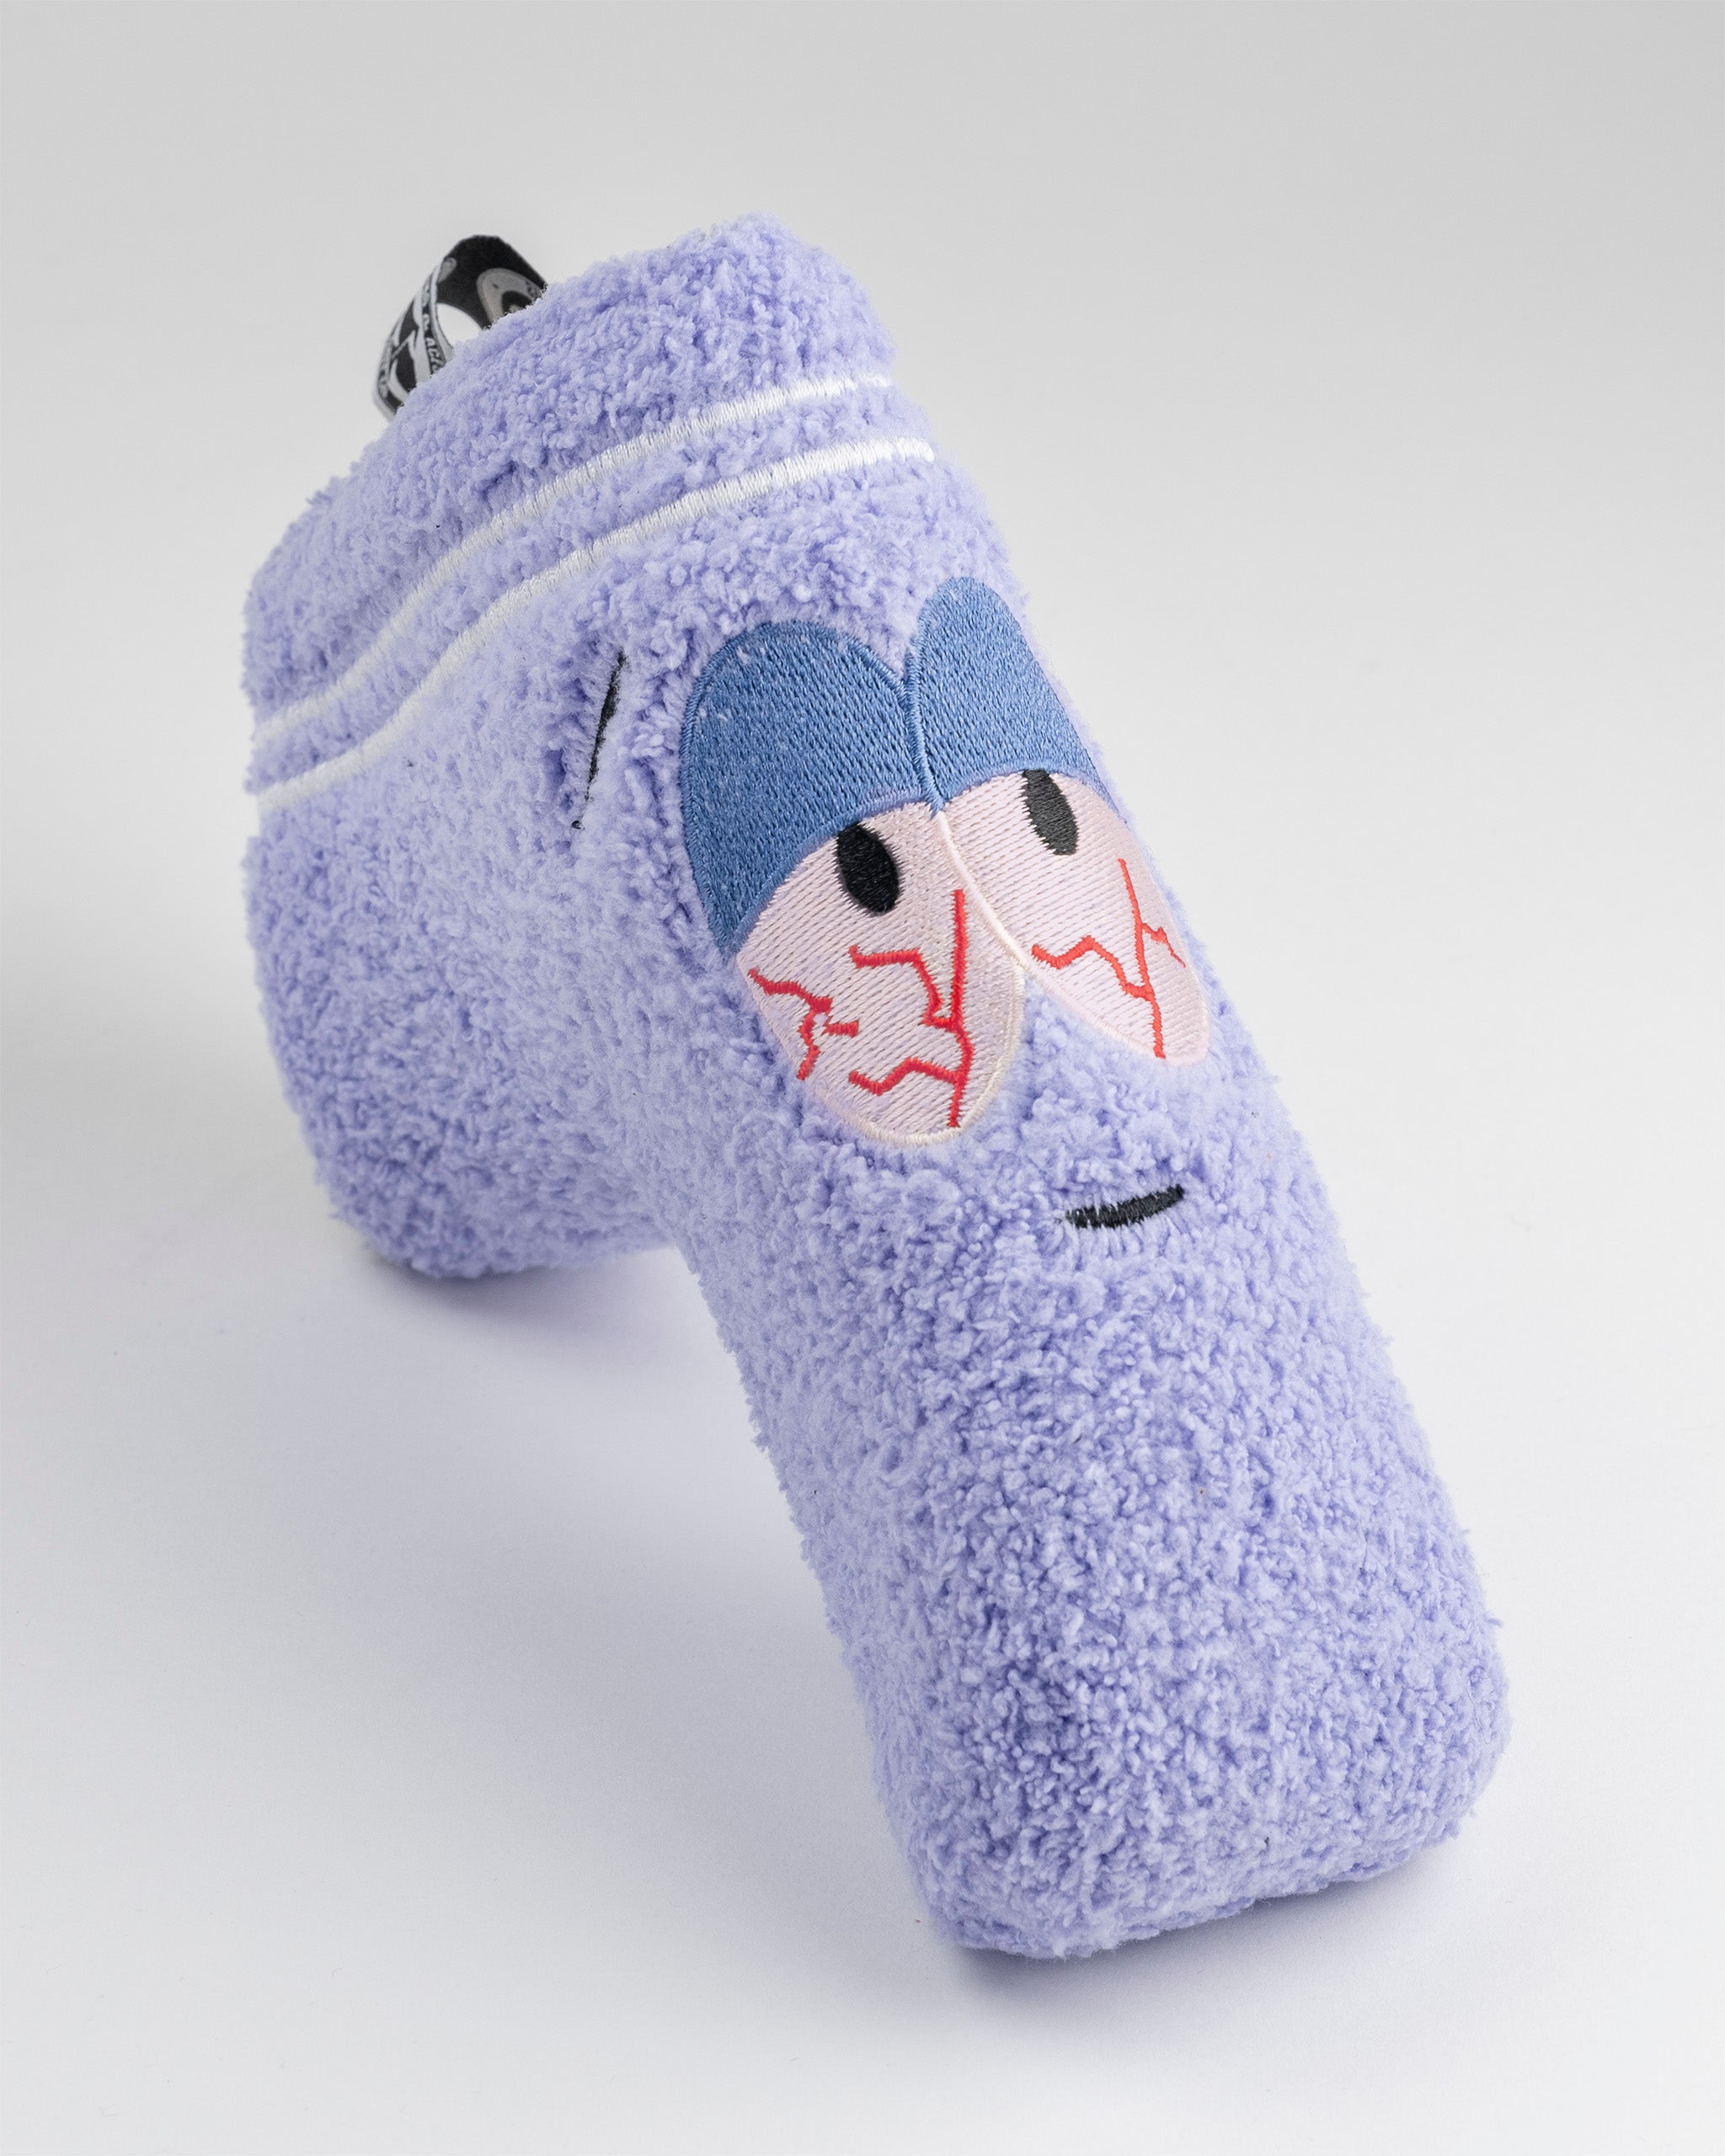 South Park - Towelie Blade Putter Cover